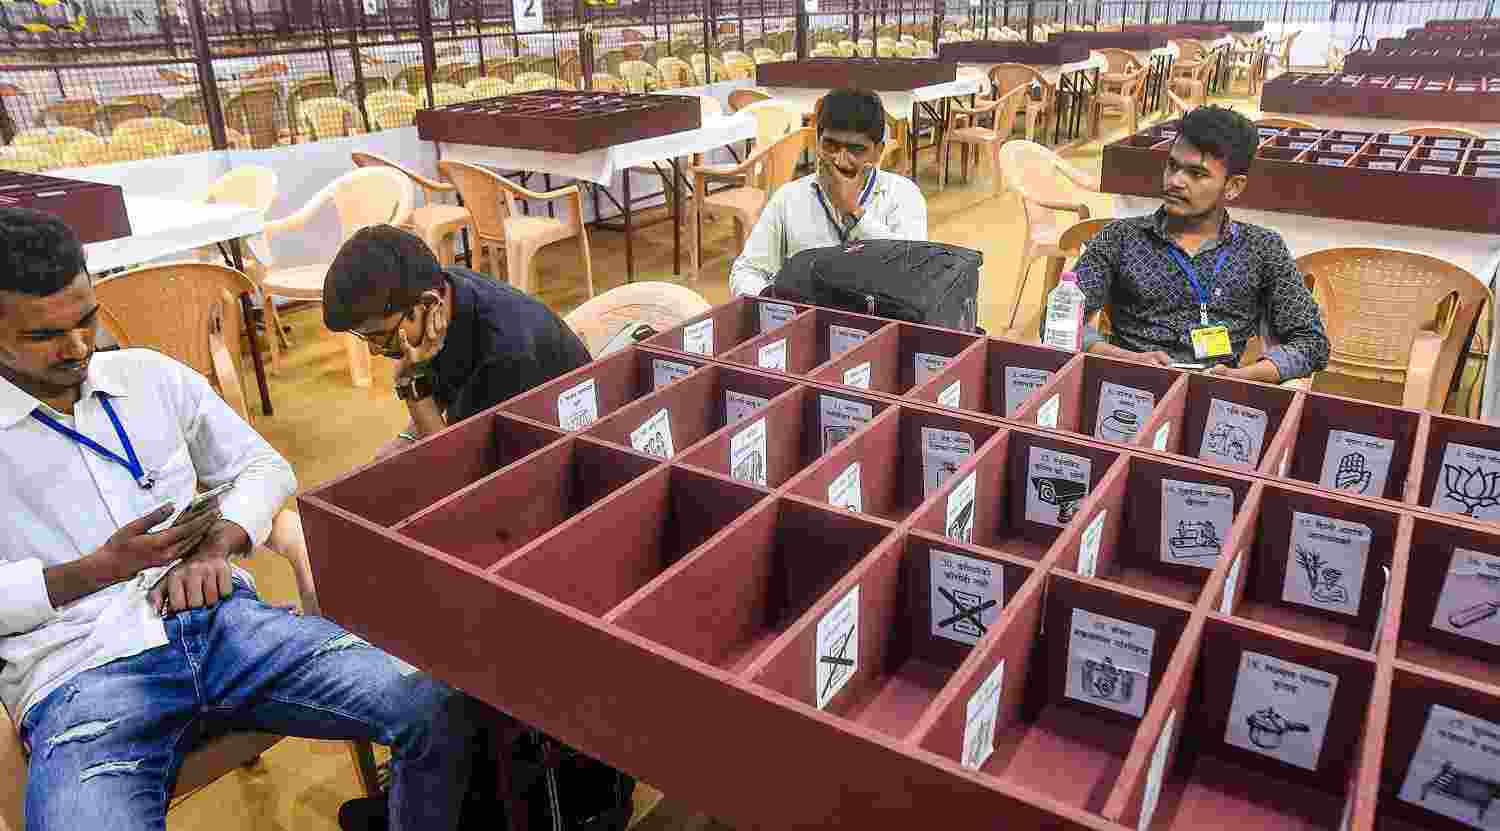 Behind the scenes: How India counts its votes